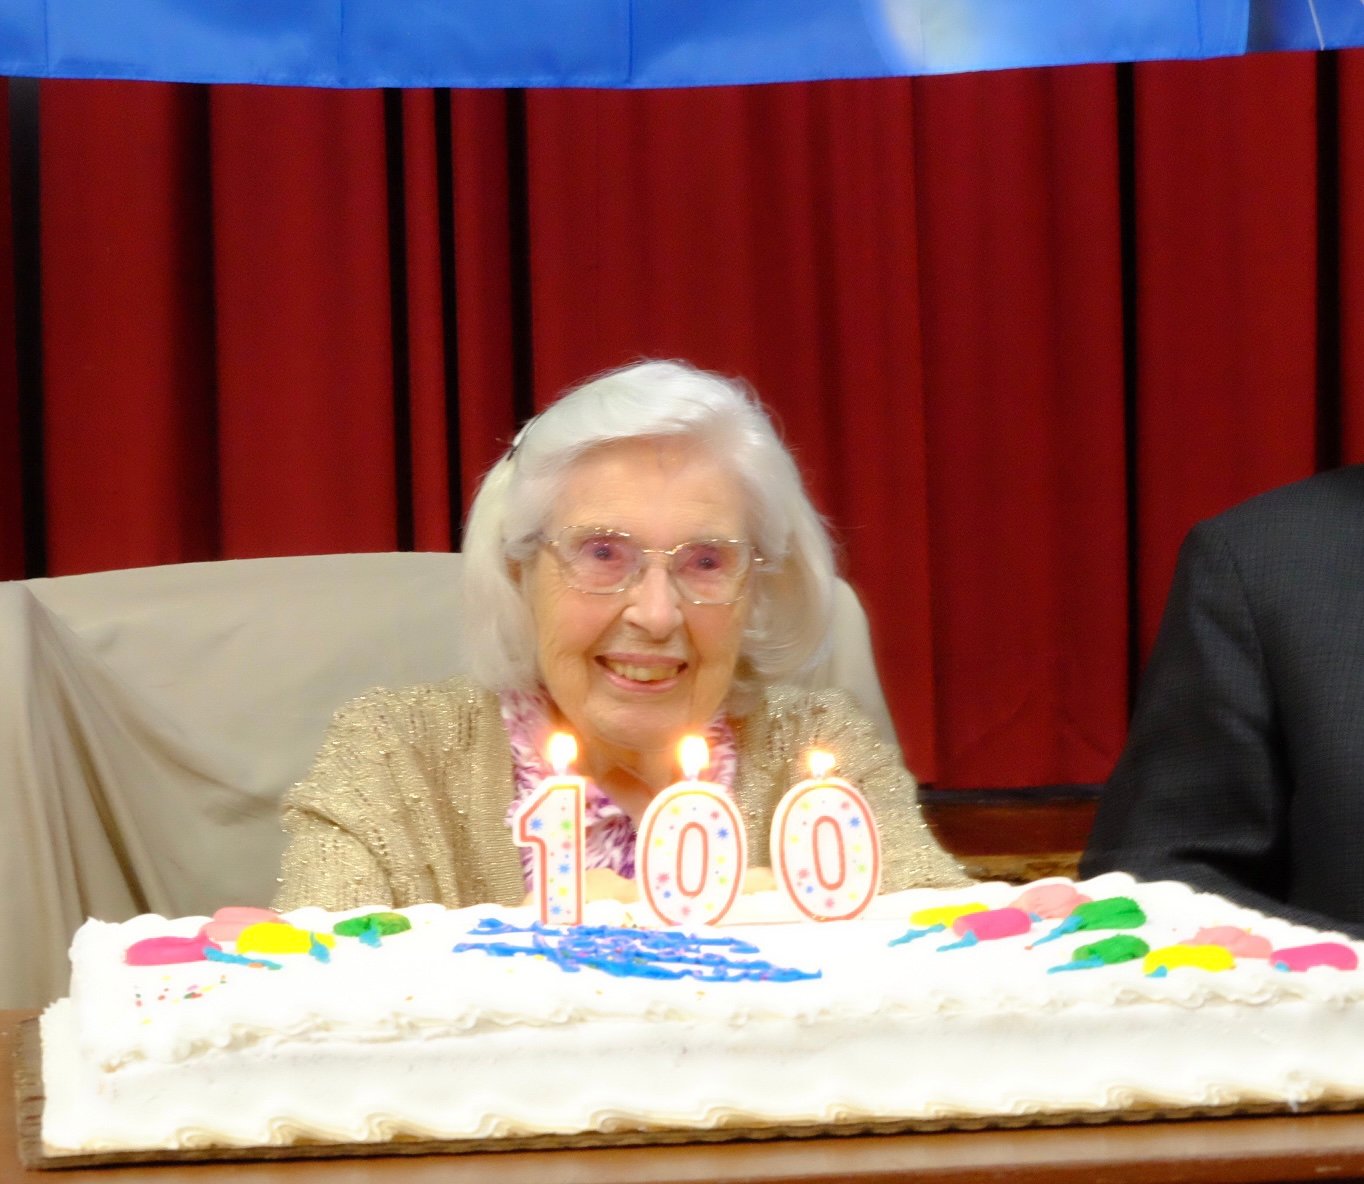 Norine Jones celebrated her 100th birthday Sunday at the Baw Faw Grange with more than 100 family members and friends in attendance.